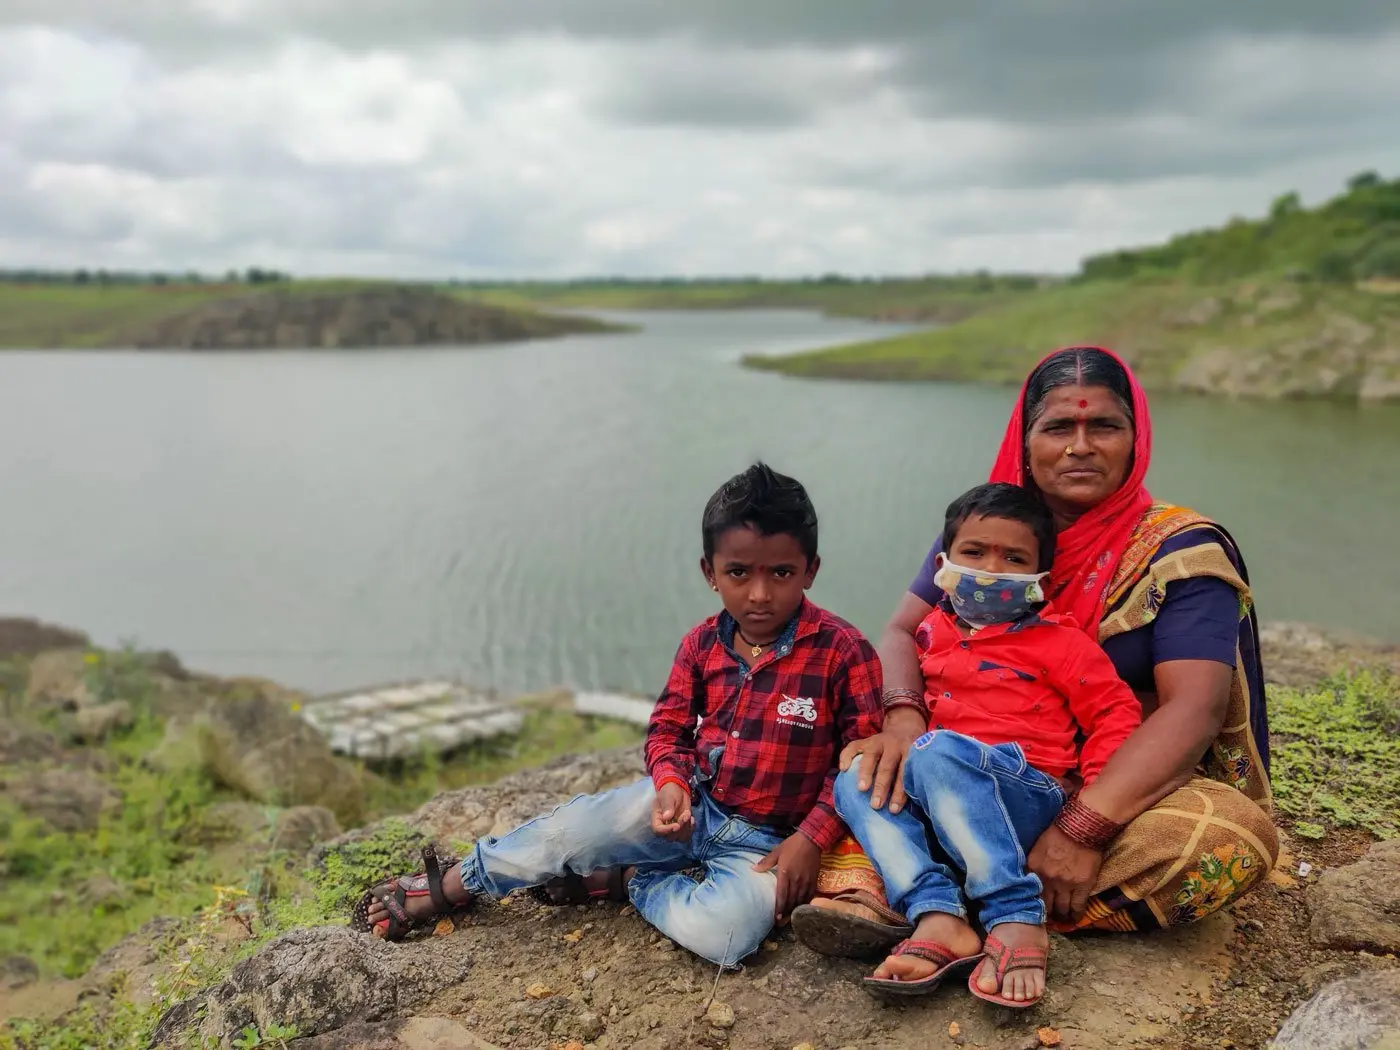 Grandmother sits along a river bank with two children